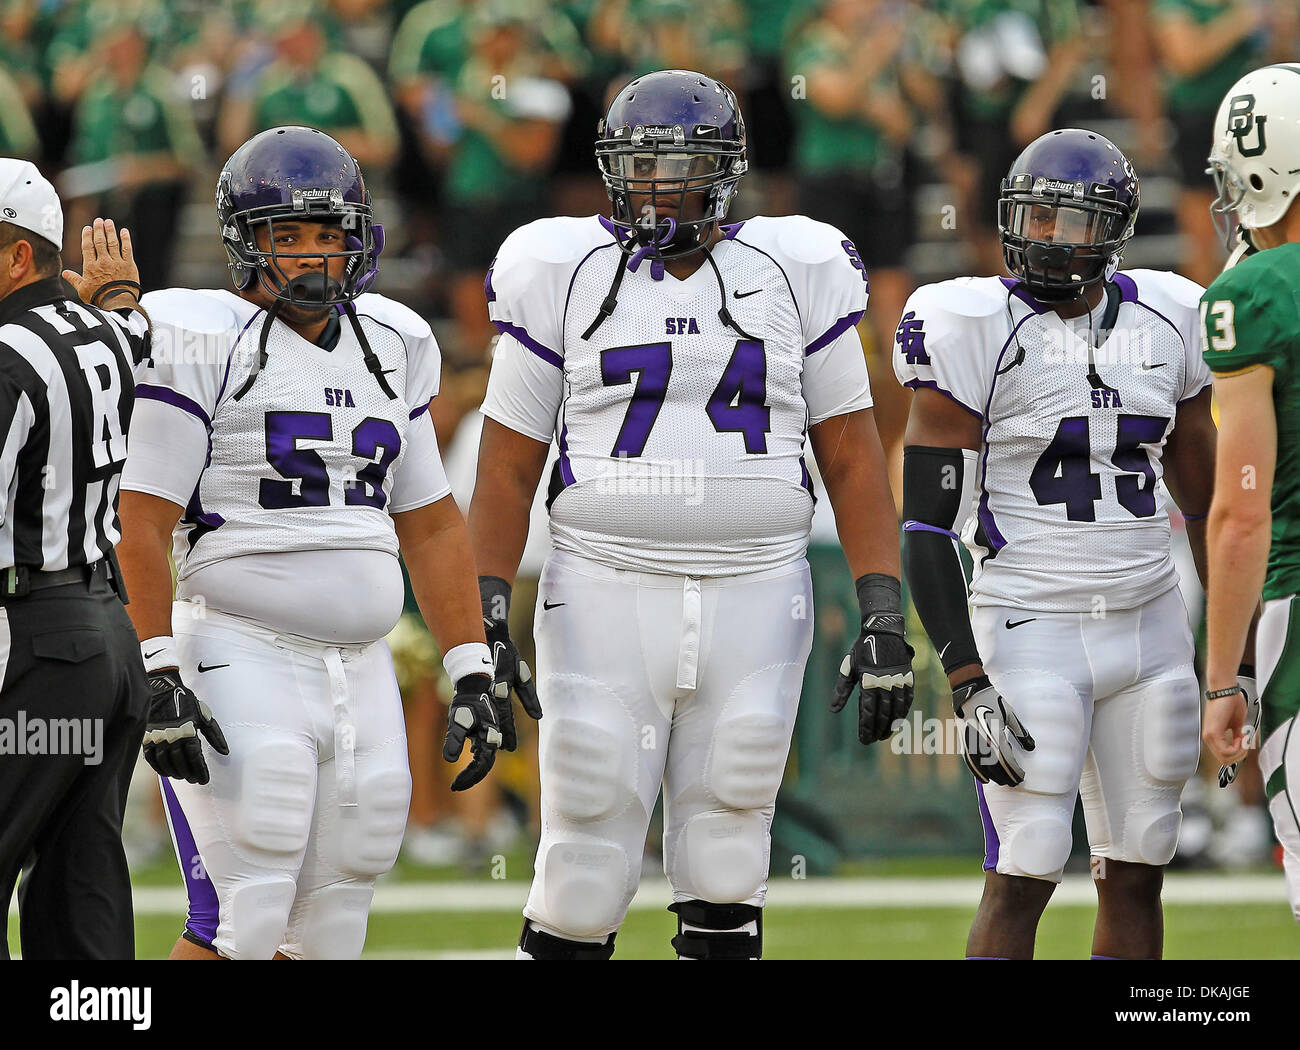 Sept. 17, 2011 - Waco, Texas, United States of America - Stephen F. Austin Lumberjacks defensive lineman Wayne Thompson (53), Stephen F. Austin Lumberjacks linebacker Derrick Choice (45) and Stephen F. Austin Lumberjacks offensive linesman Willie Watkins (74) in action during the game between the Stephen F. Austin Lumberjacks and the Baylor Bears at the Floyd Casey Stadium in Waco, Stock Photo